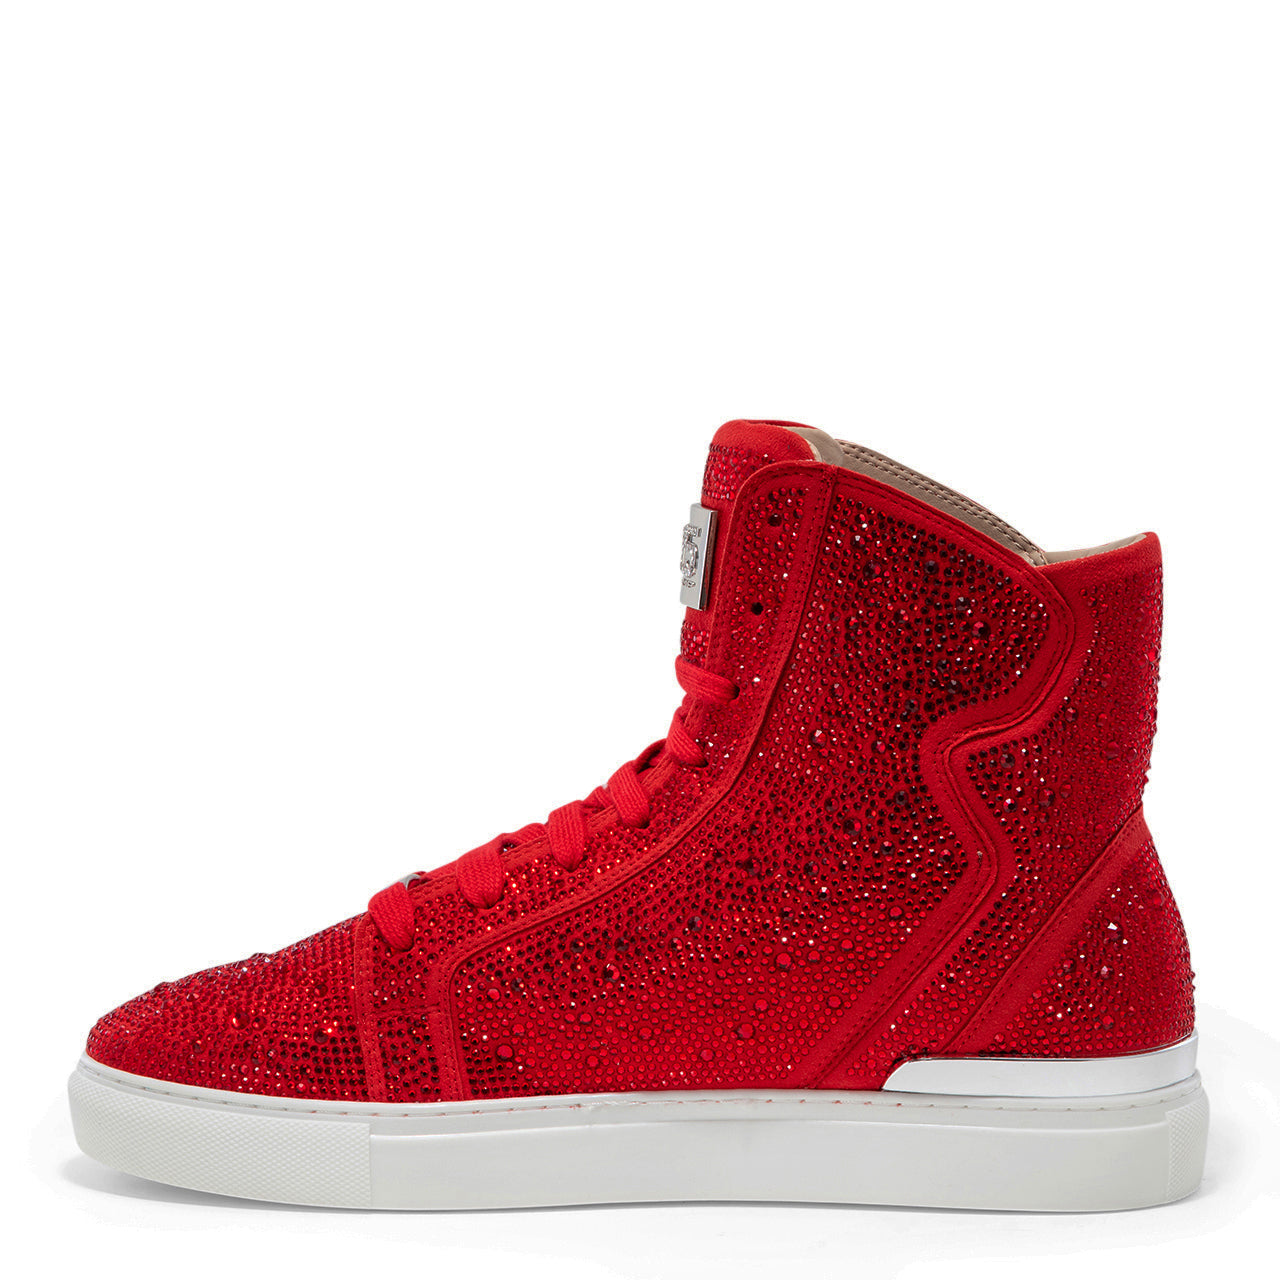 Sestos - Red High top Fashion Sneakers for Men by J75 2